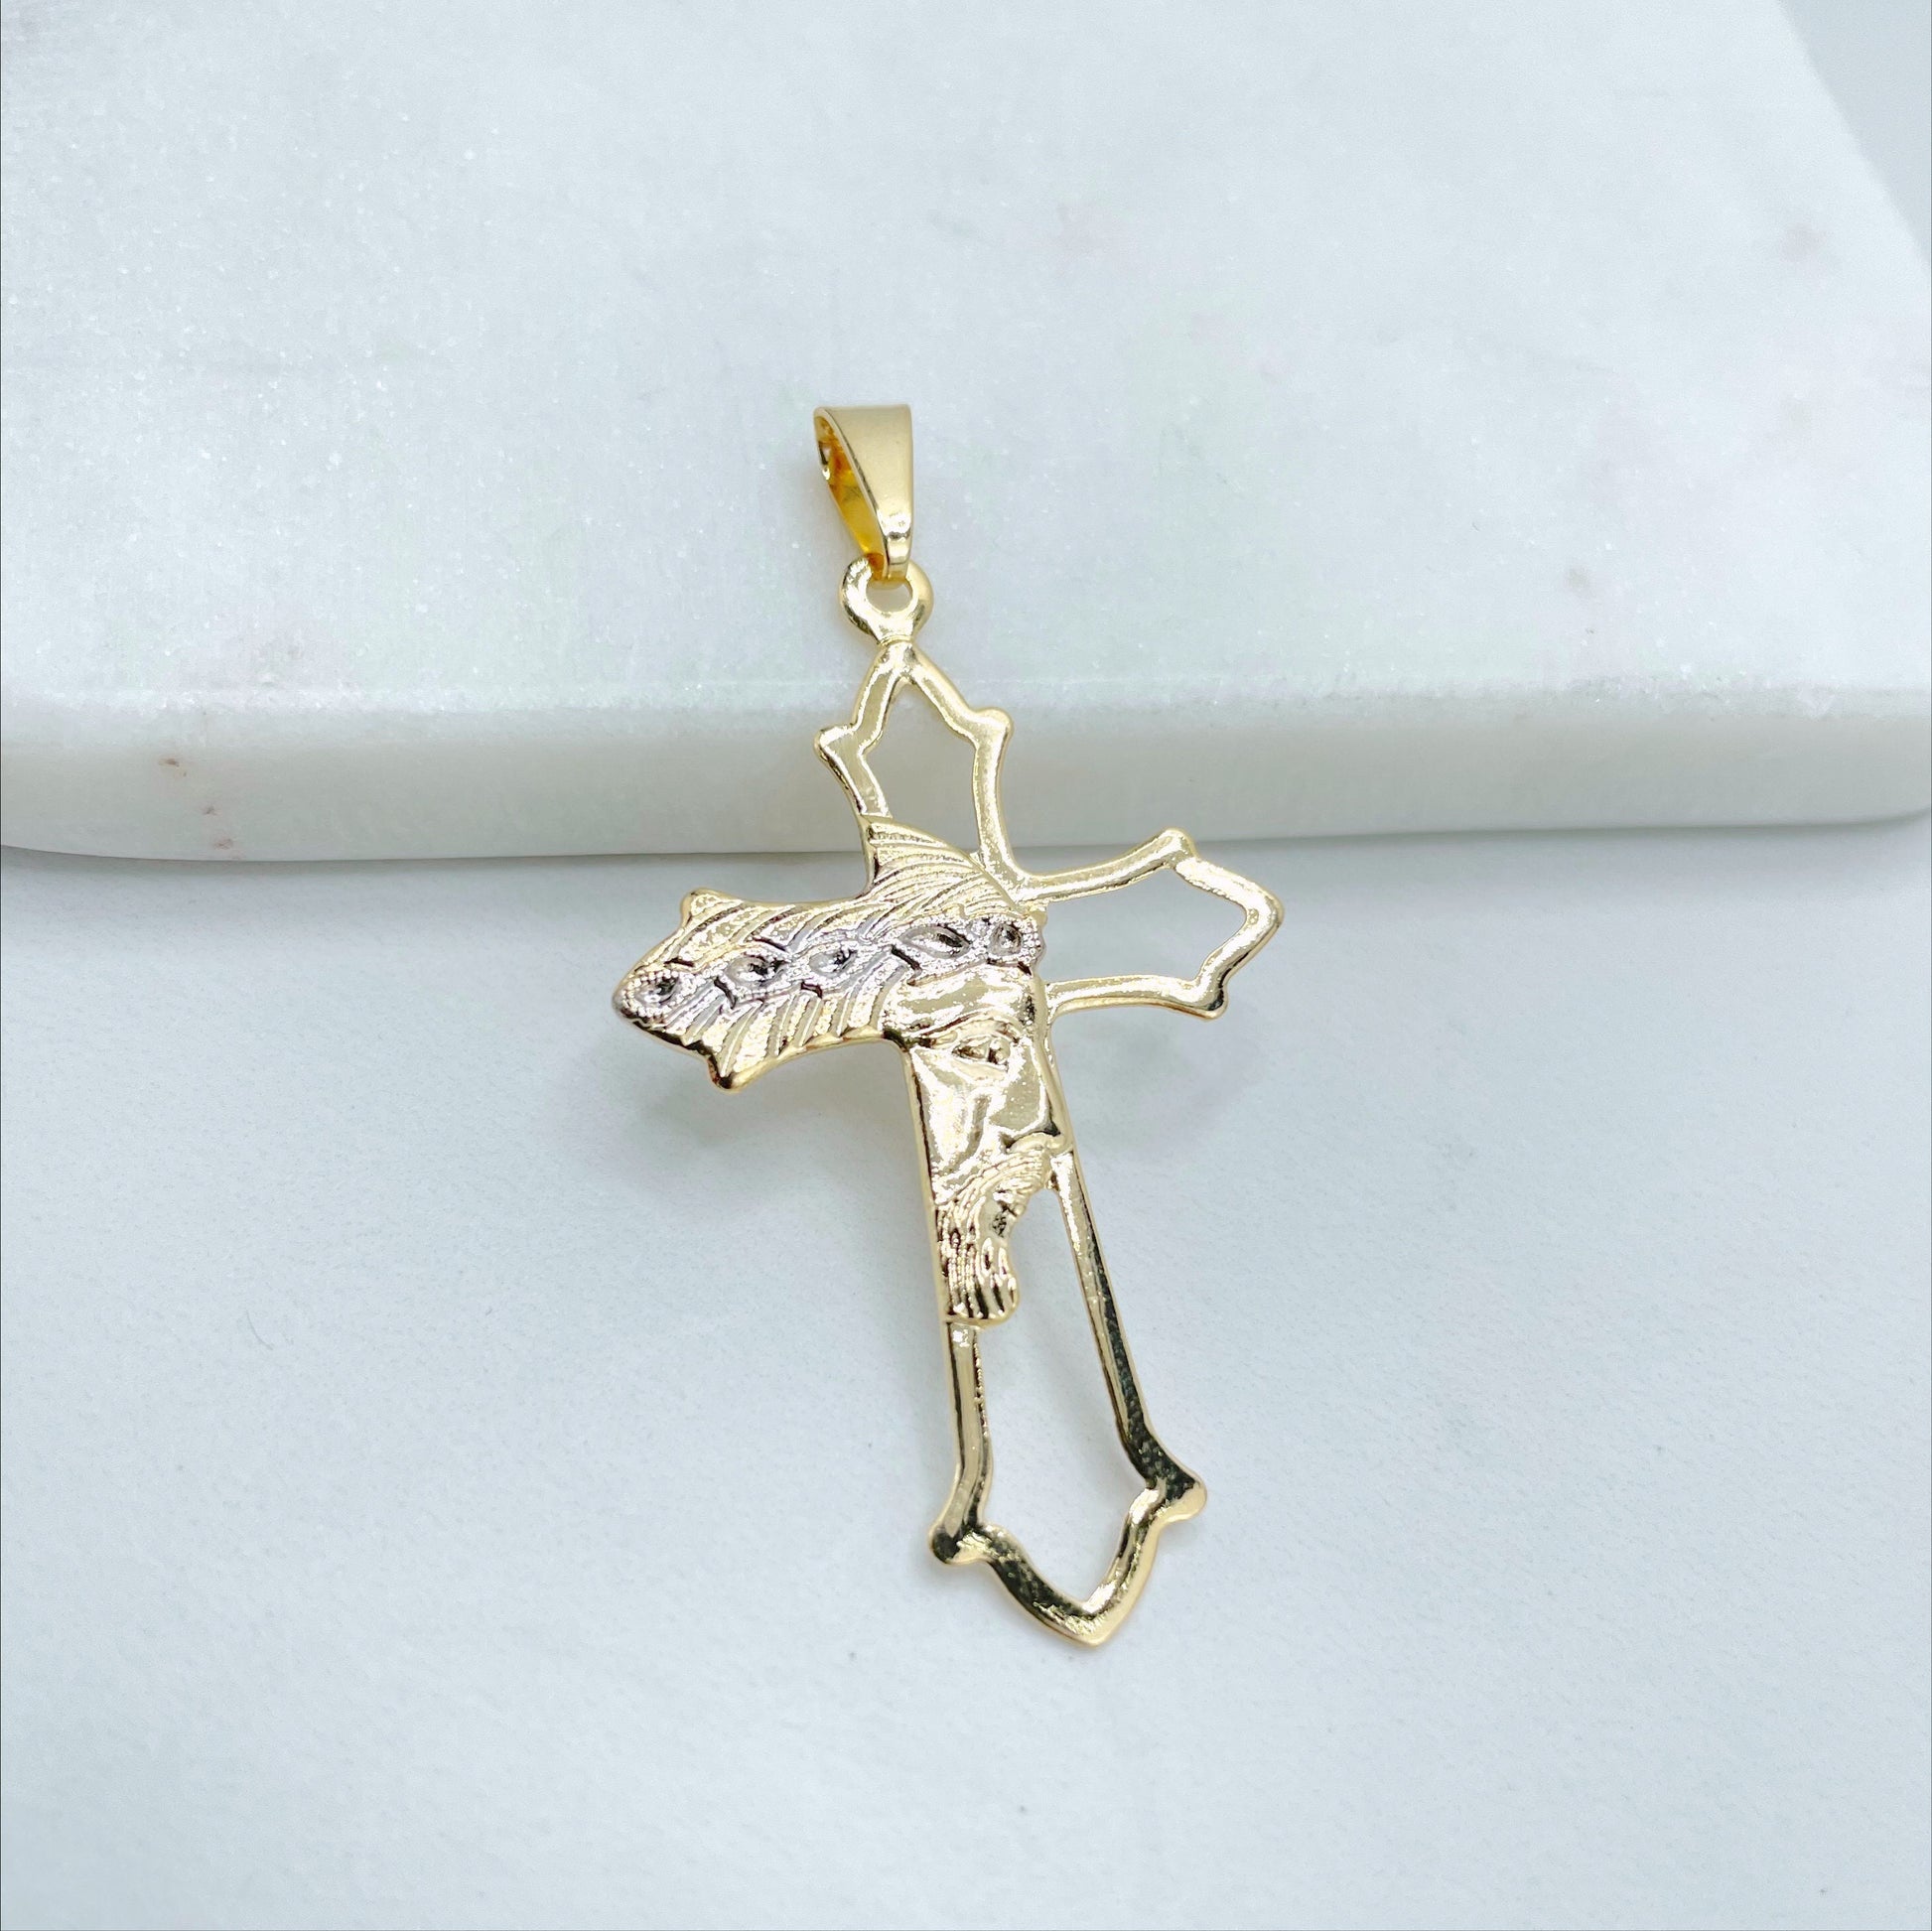 18k Gold Filled Two Tone Cross with Jesus Face Charms Pendants, Catholic Religious Holy Cross, Wholesale Jewelry Making Supplies